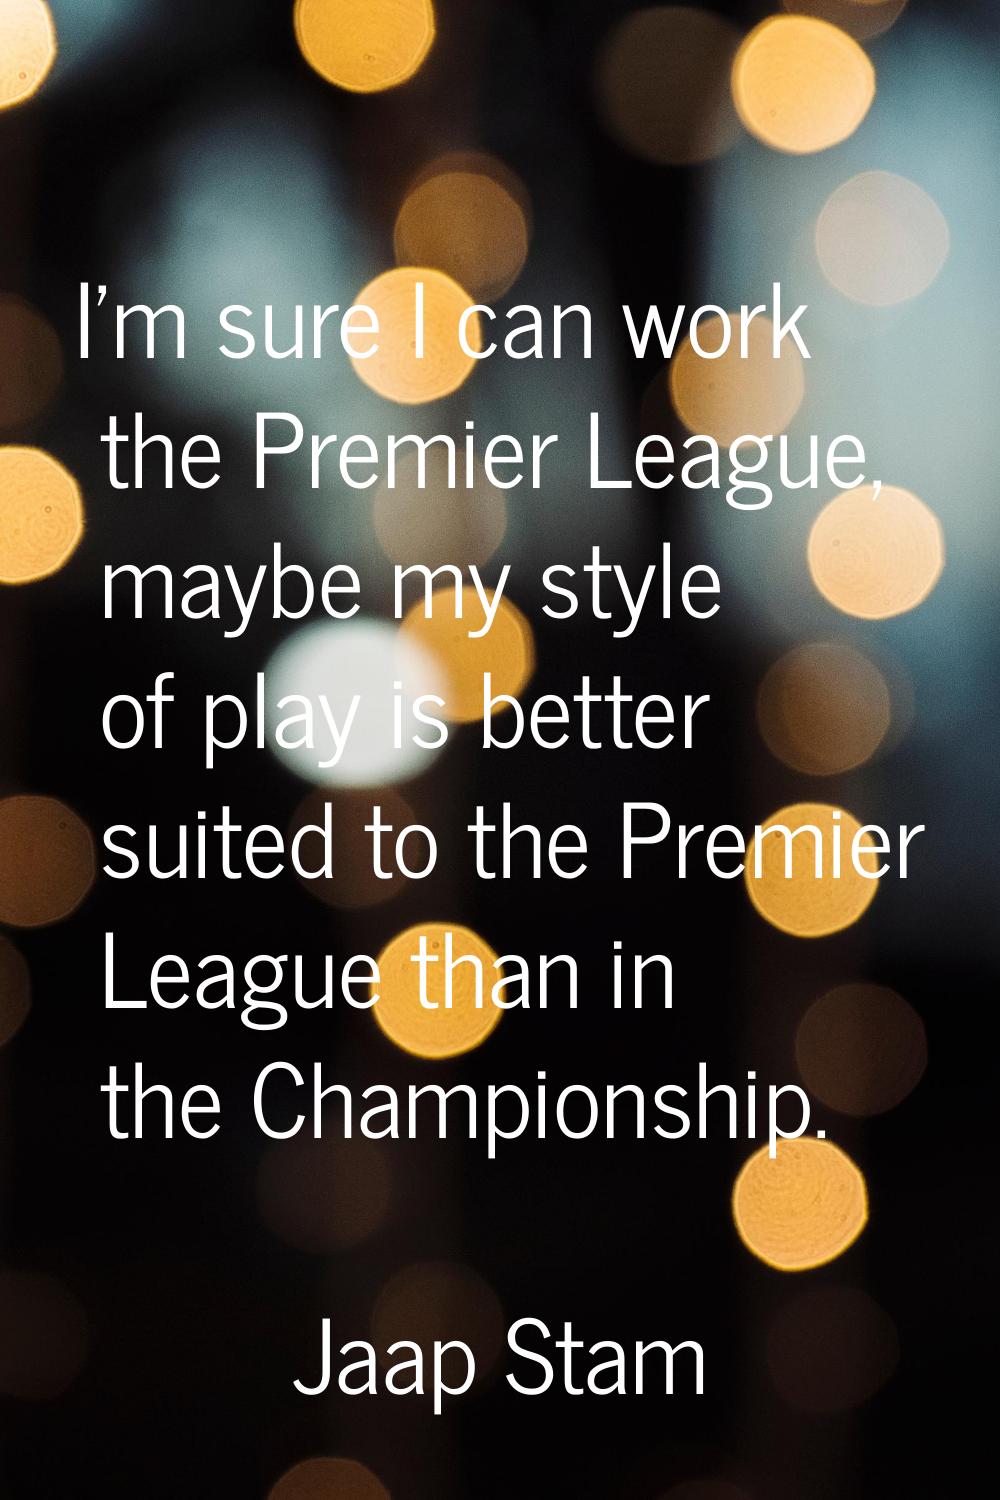 I'm sure I can work the Premier League, maybe my style of play is better suited to the Premier Leag